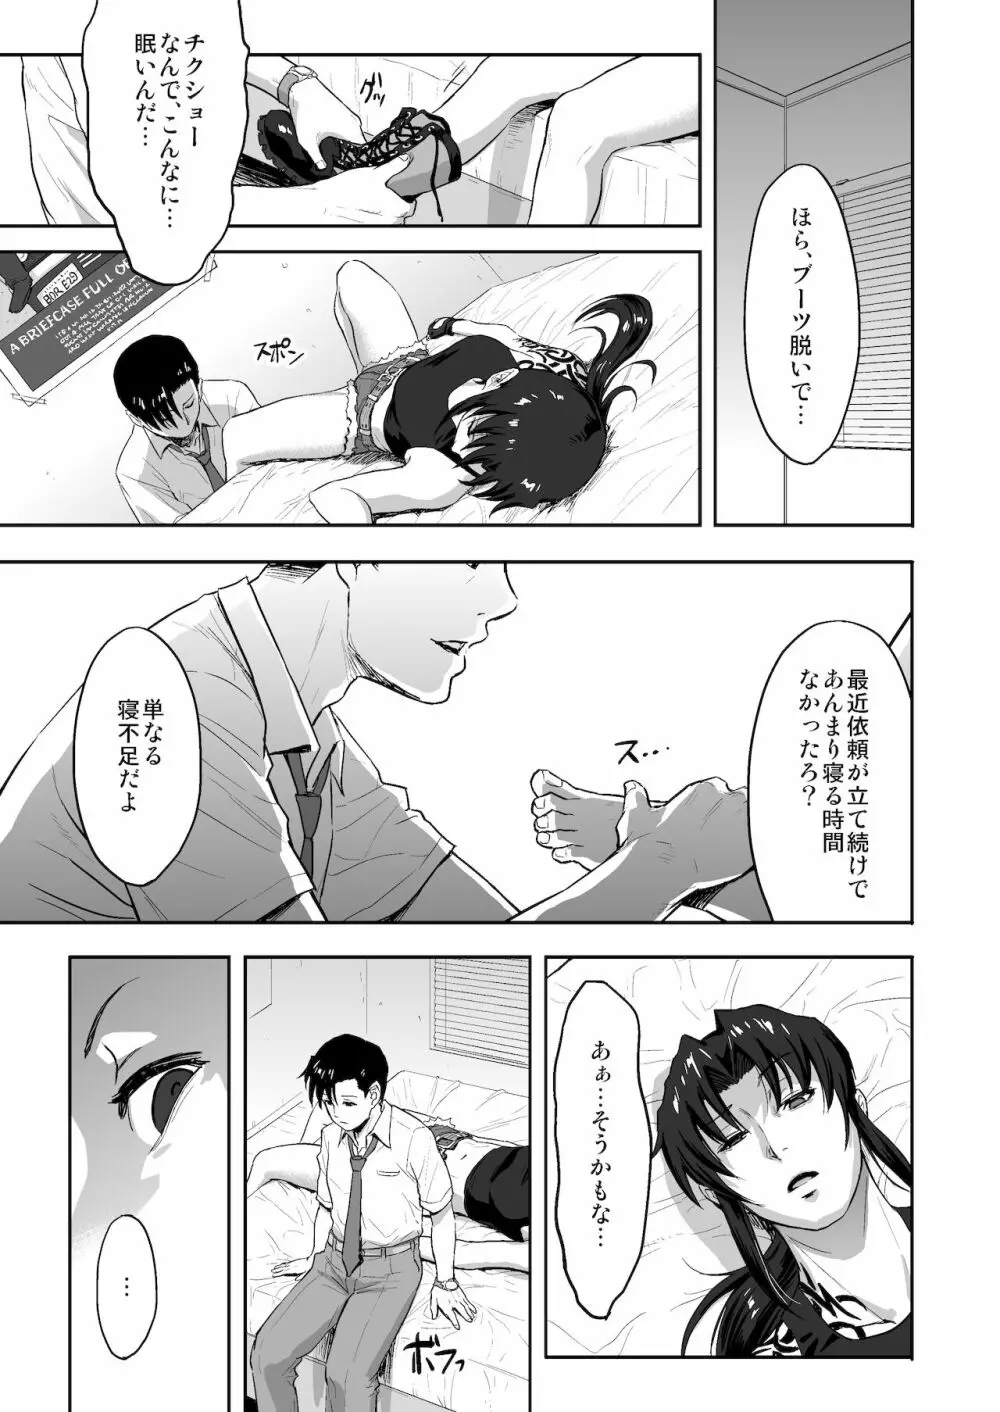 SLEEPING Revy - page6